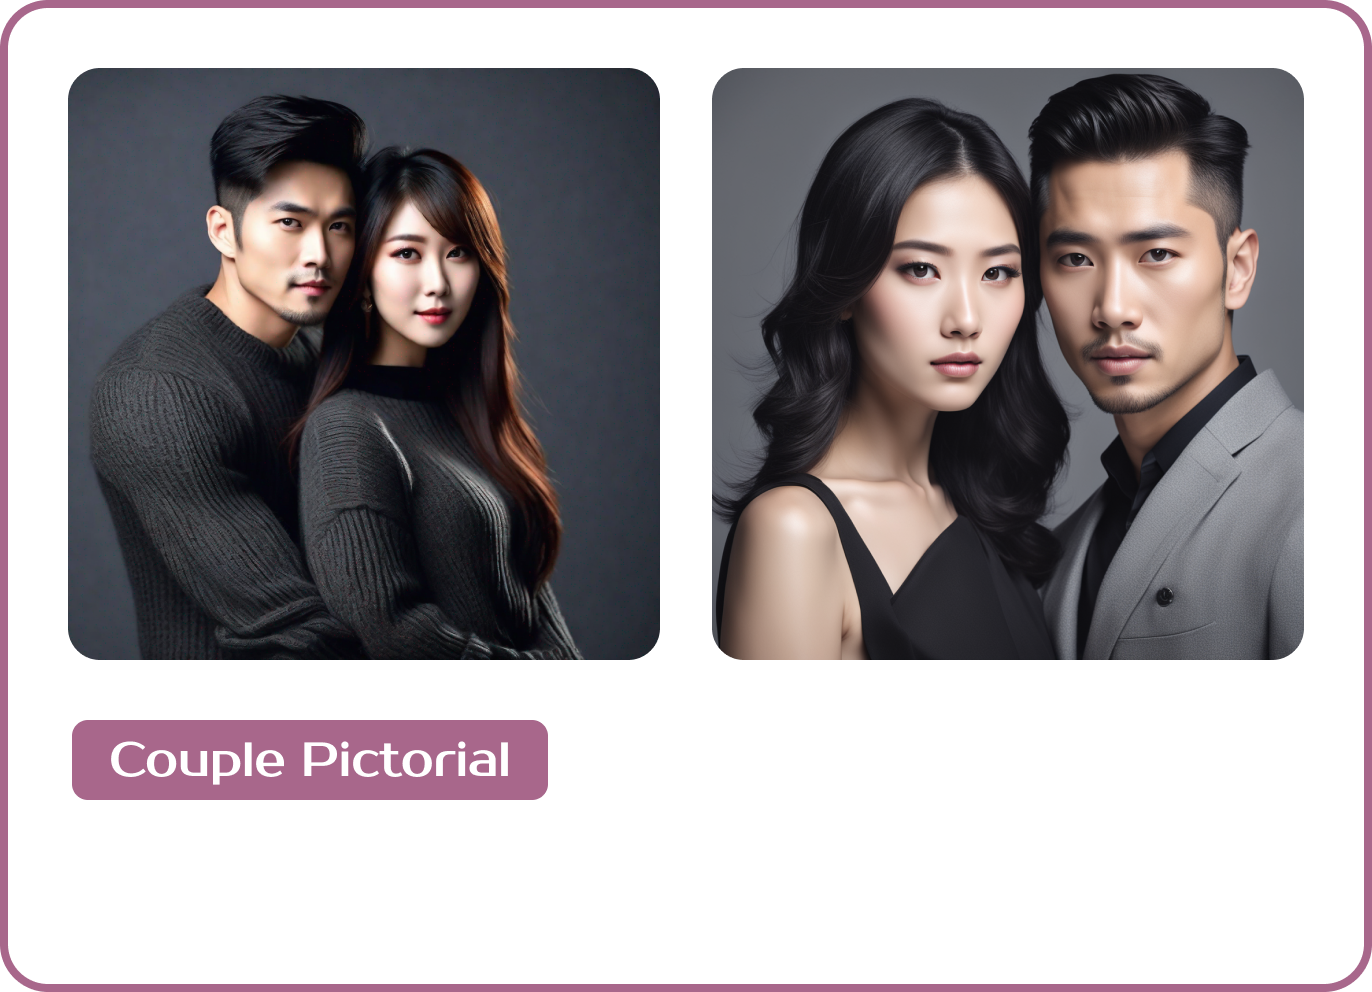 Couple Pictorial theme image